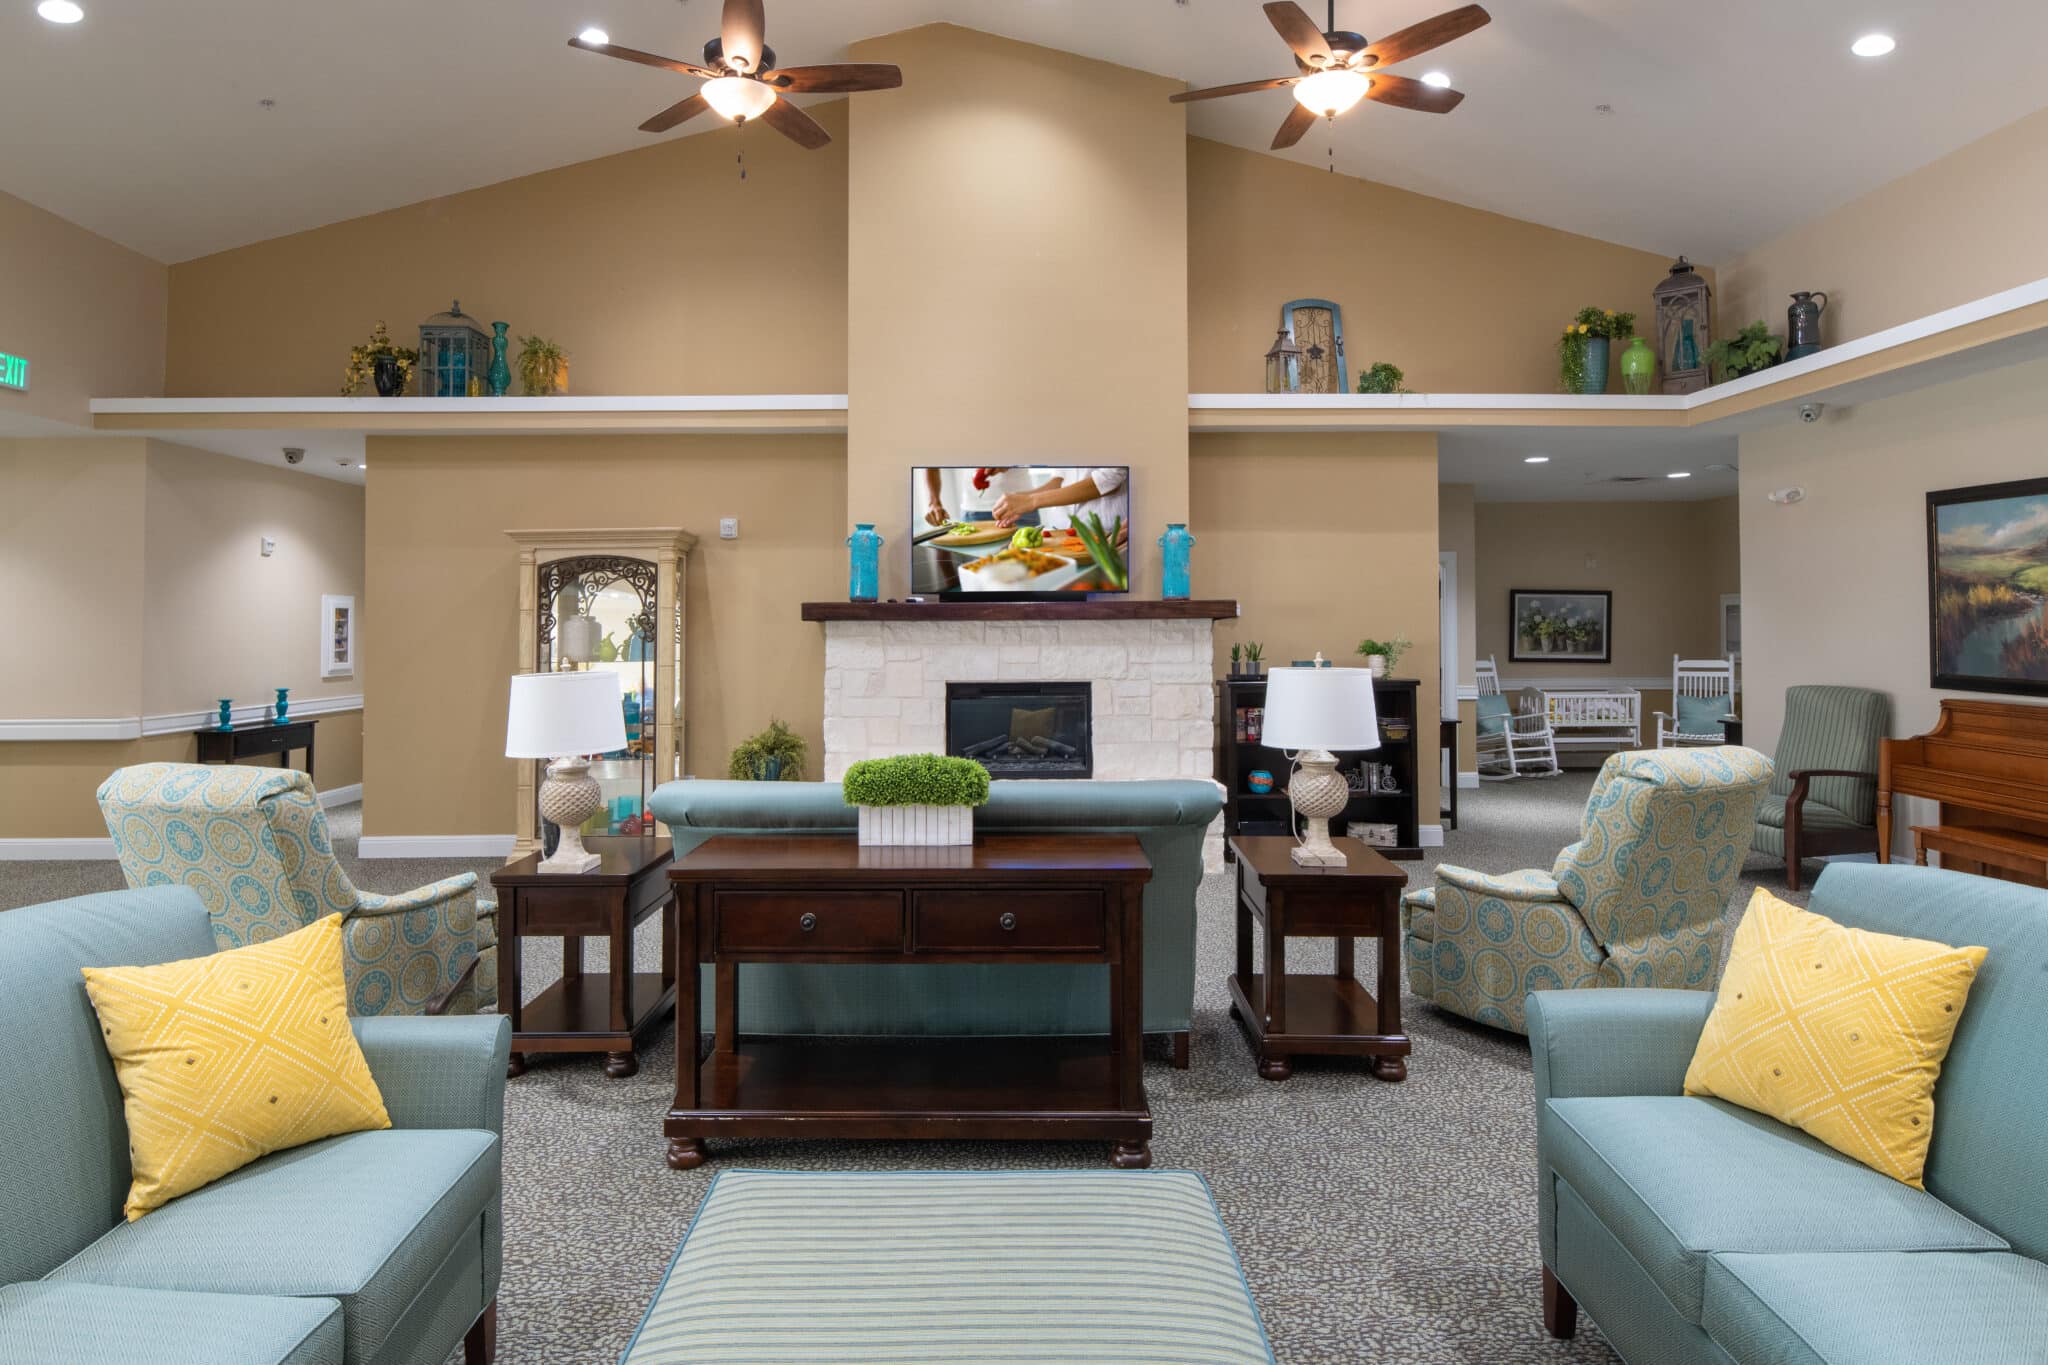 Cozy lounge area in assisted living facility with seating, fireplace, piano, and TV.